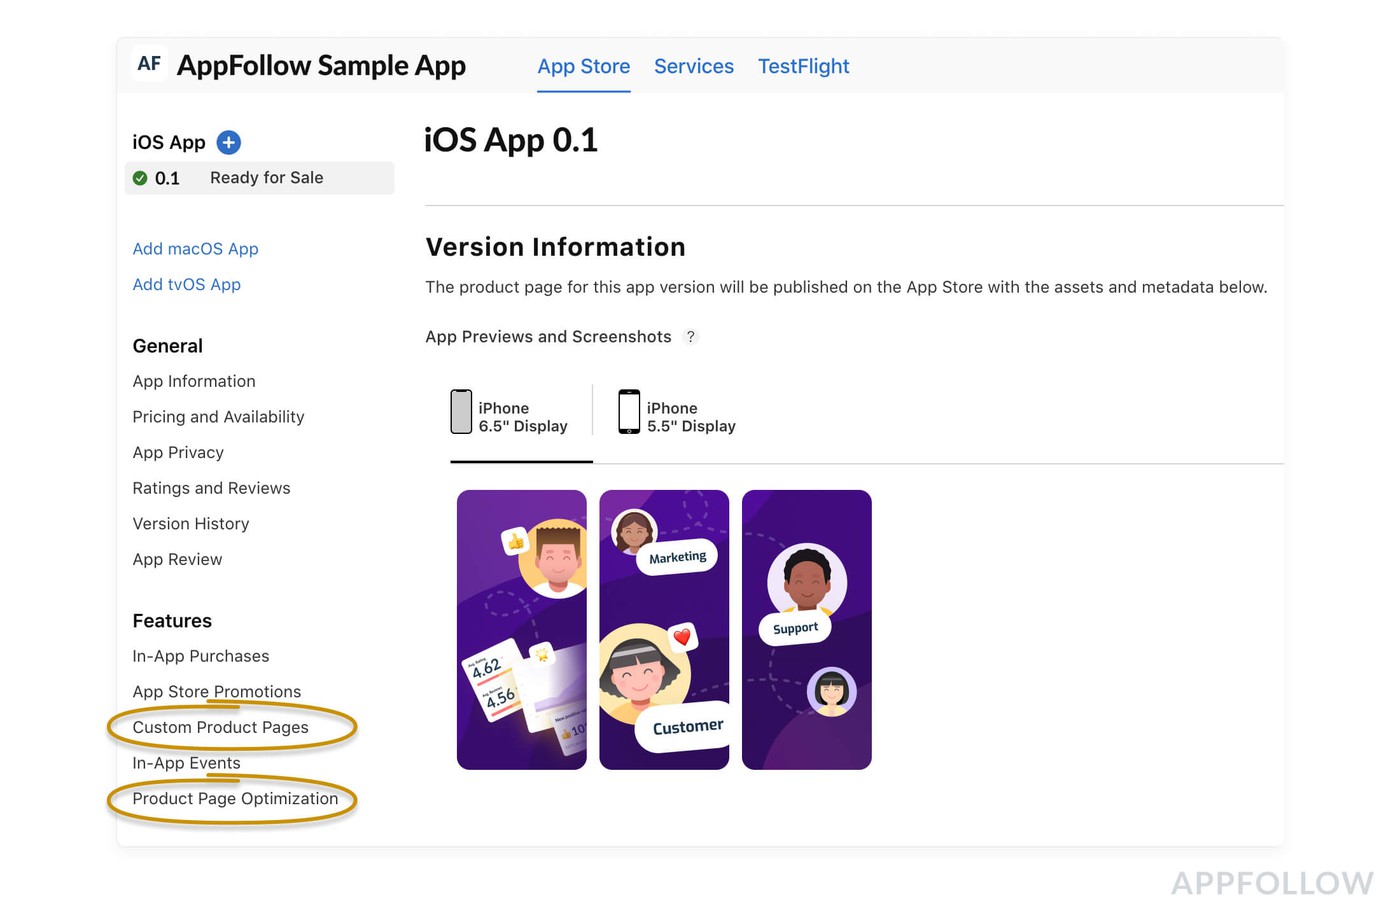 Where to find Product Page Optimization on App Store Connect